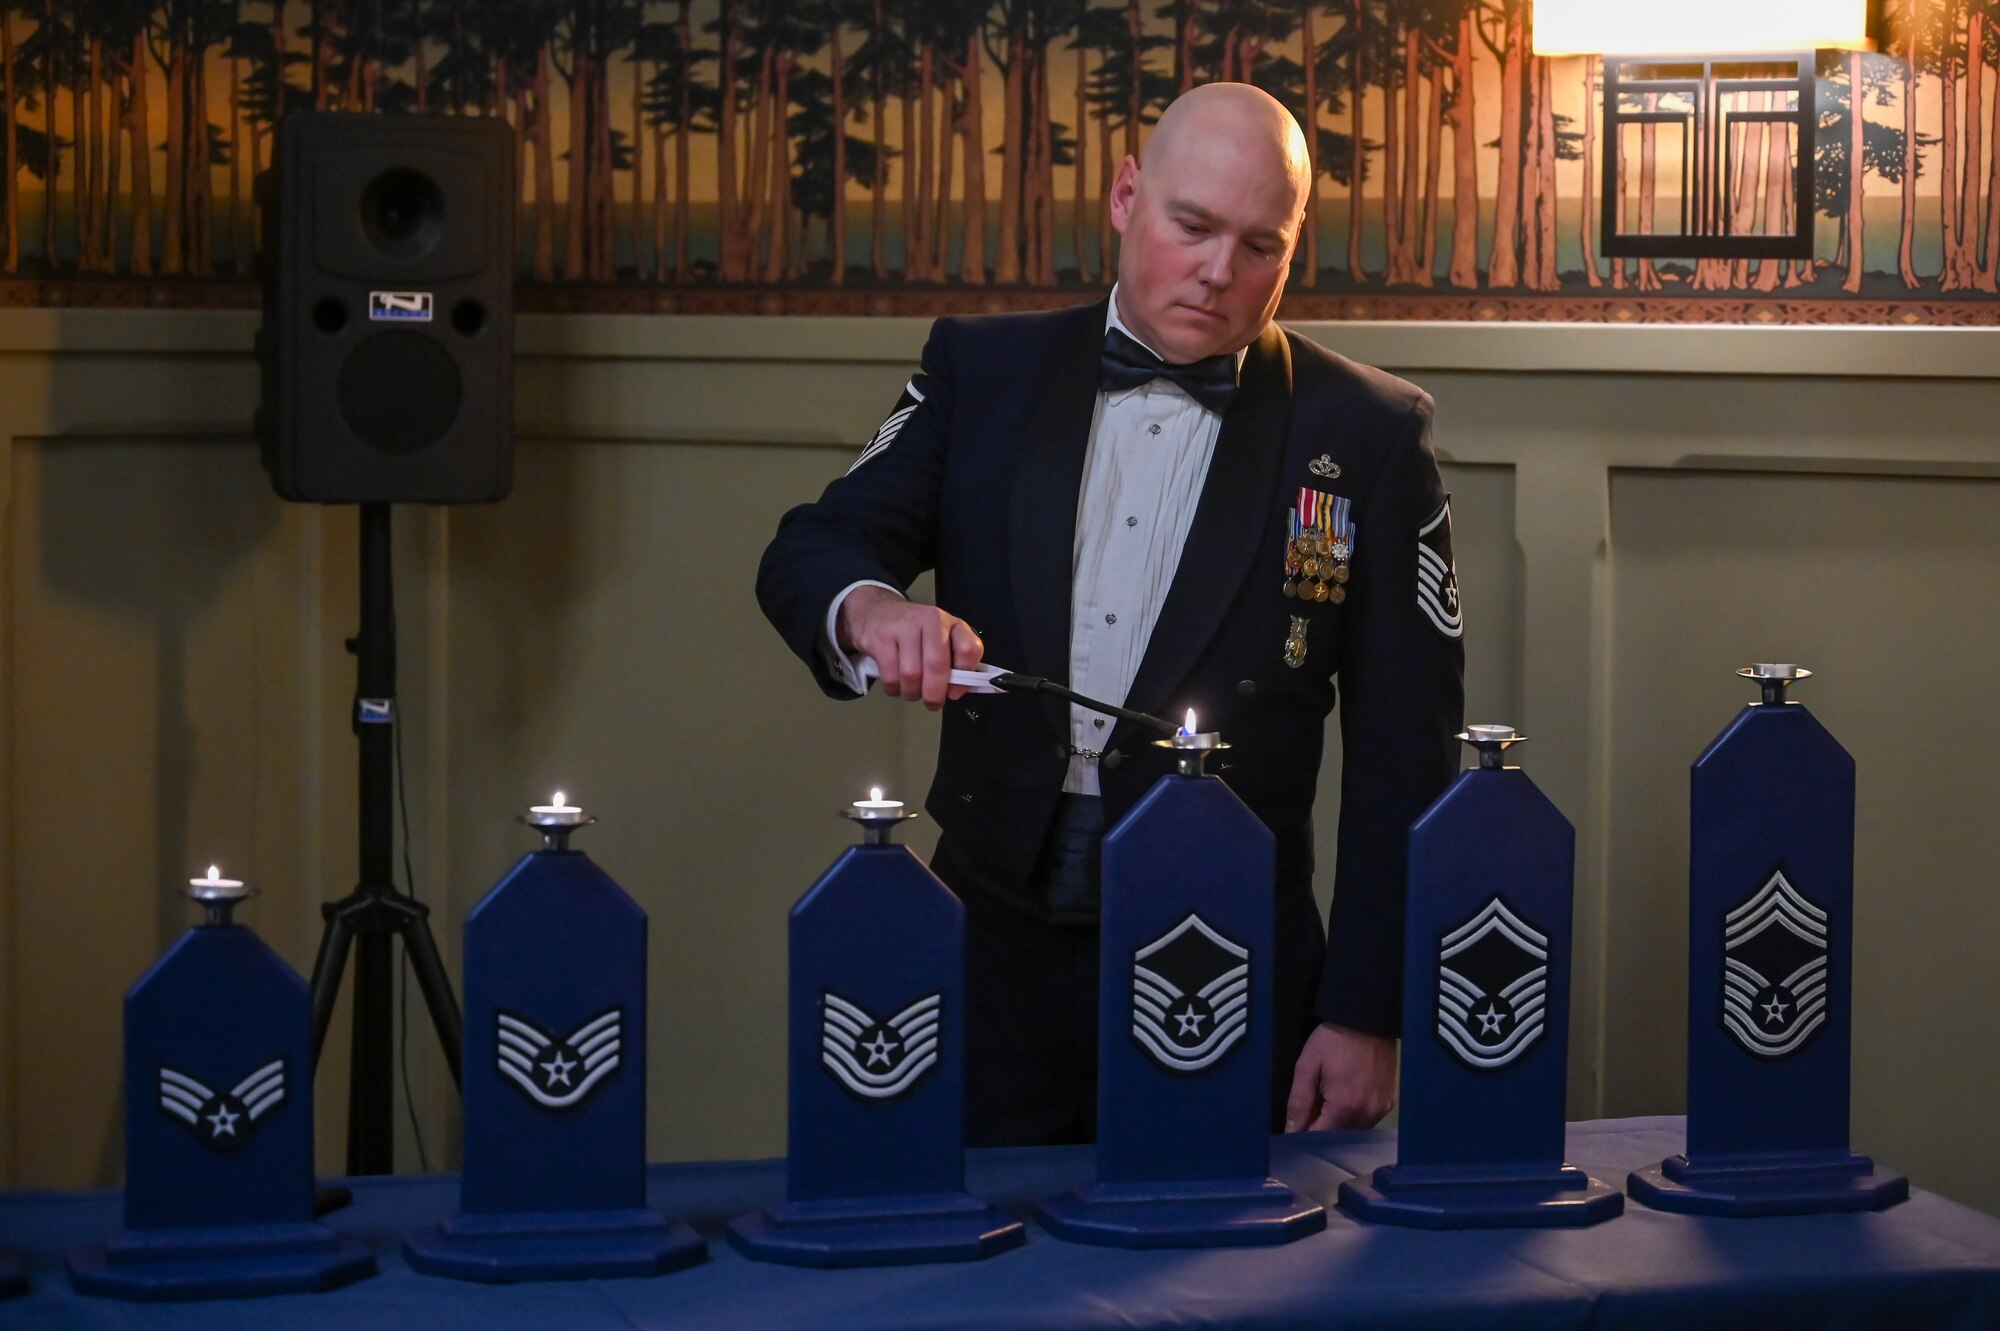 Master Sgt. Dustin Krupa, Air Force Life Cycle Management Center, lights the candle representing the rank of master sergeant during Hill Air Force Base's Chief Induction Ceremony